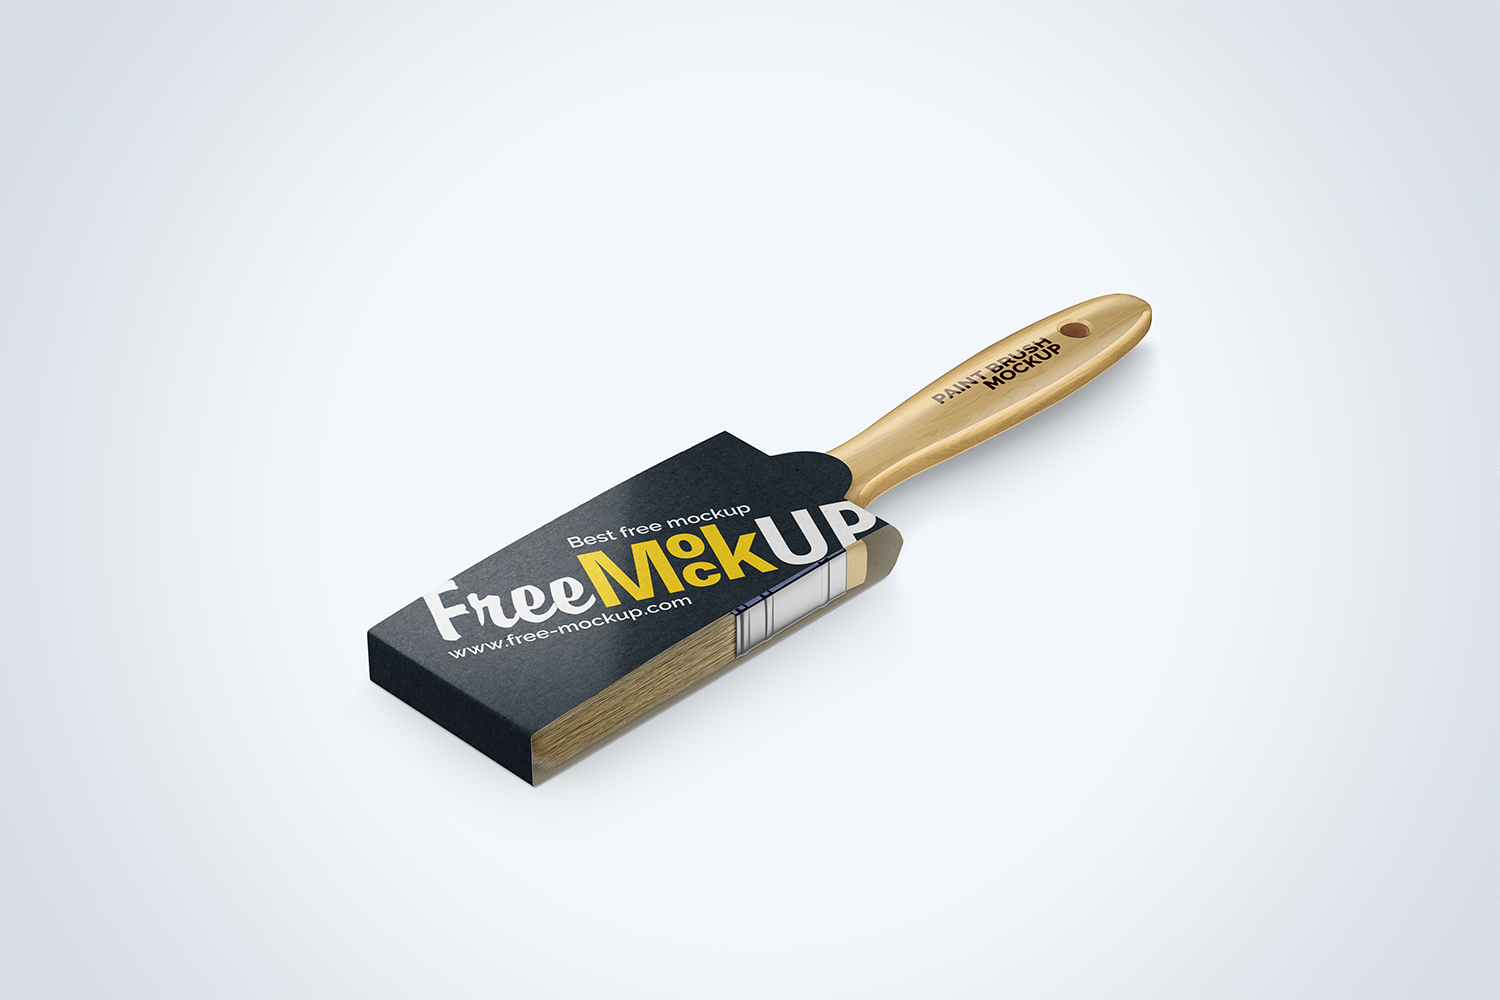 Download Brush With Wooden Grip And Kraft Label Mockup Half Side View High Angle Shot Free Mockup